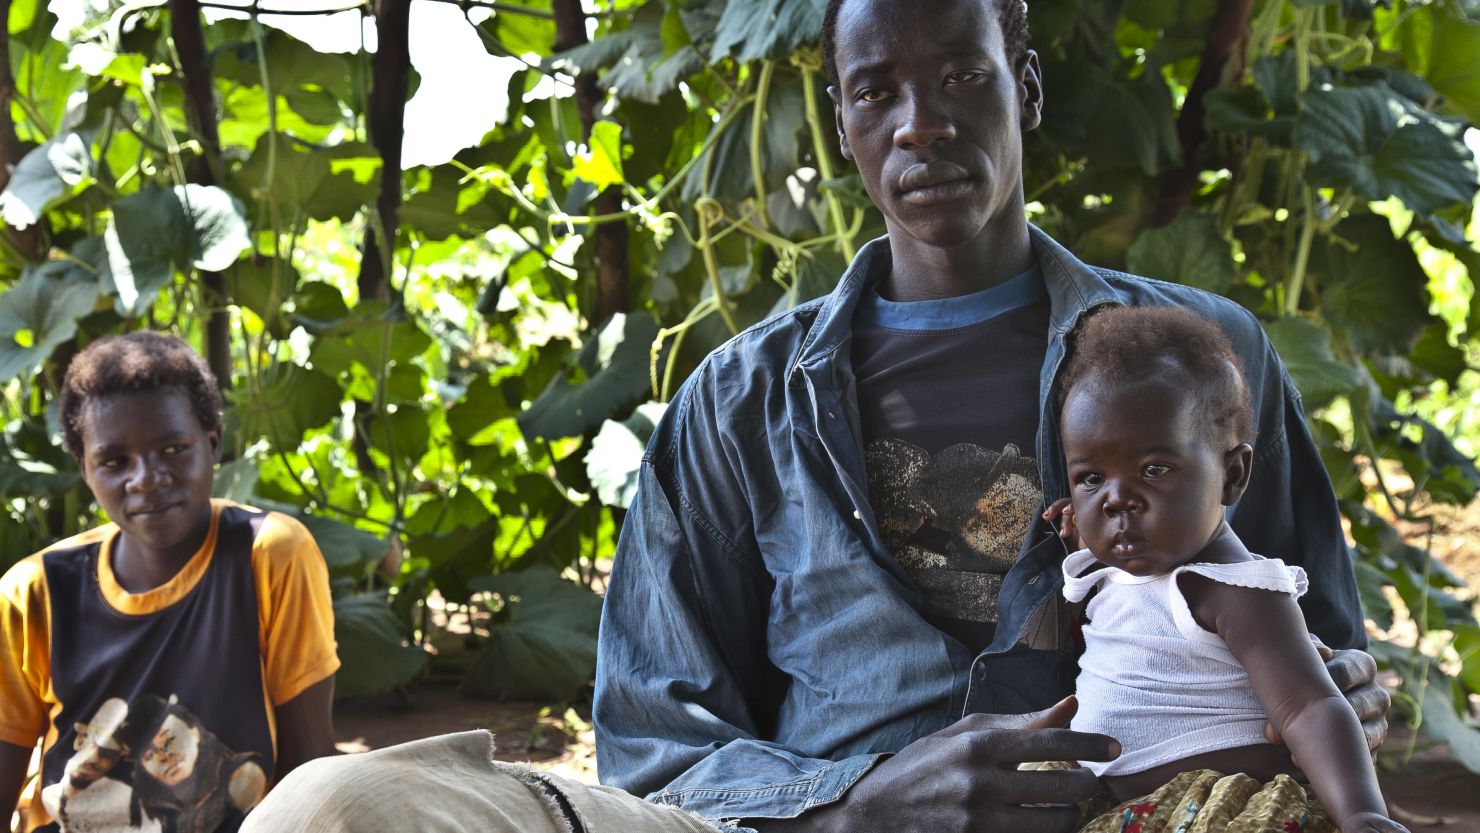 Patrick, a former child soldier, received treatment at a PCAF clinic and was able to care for his family.